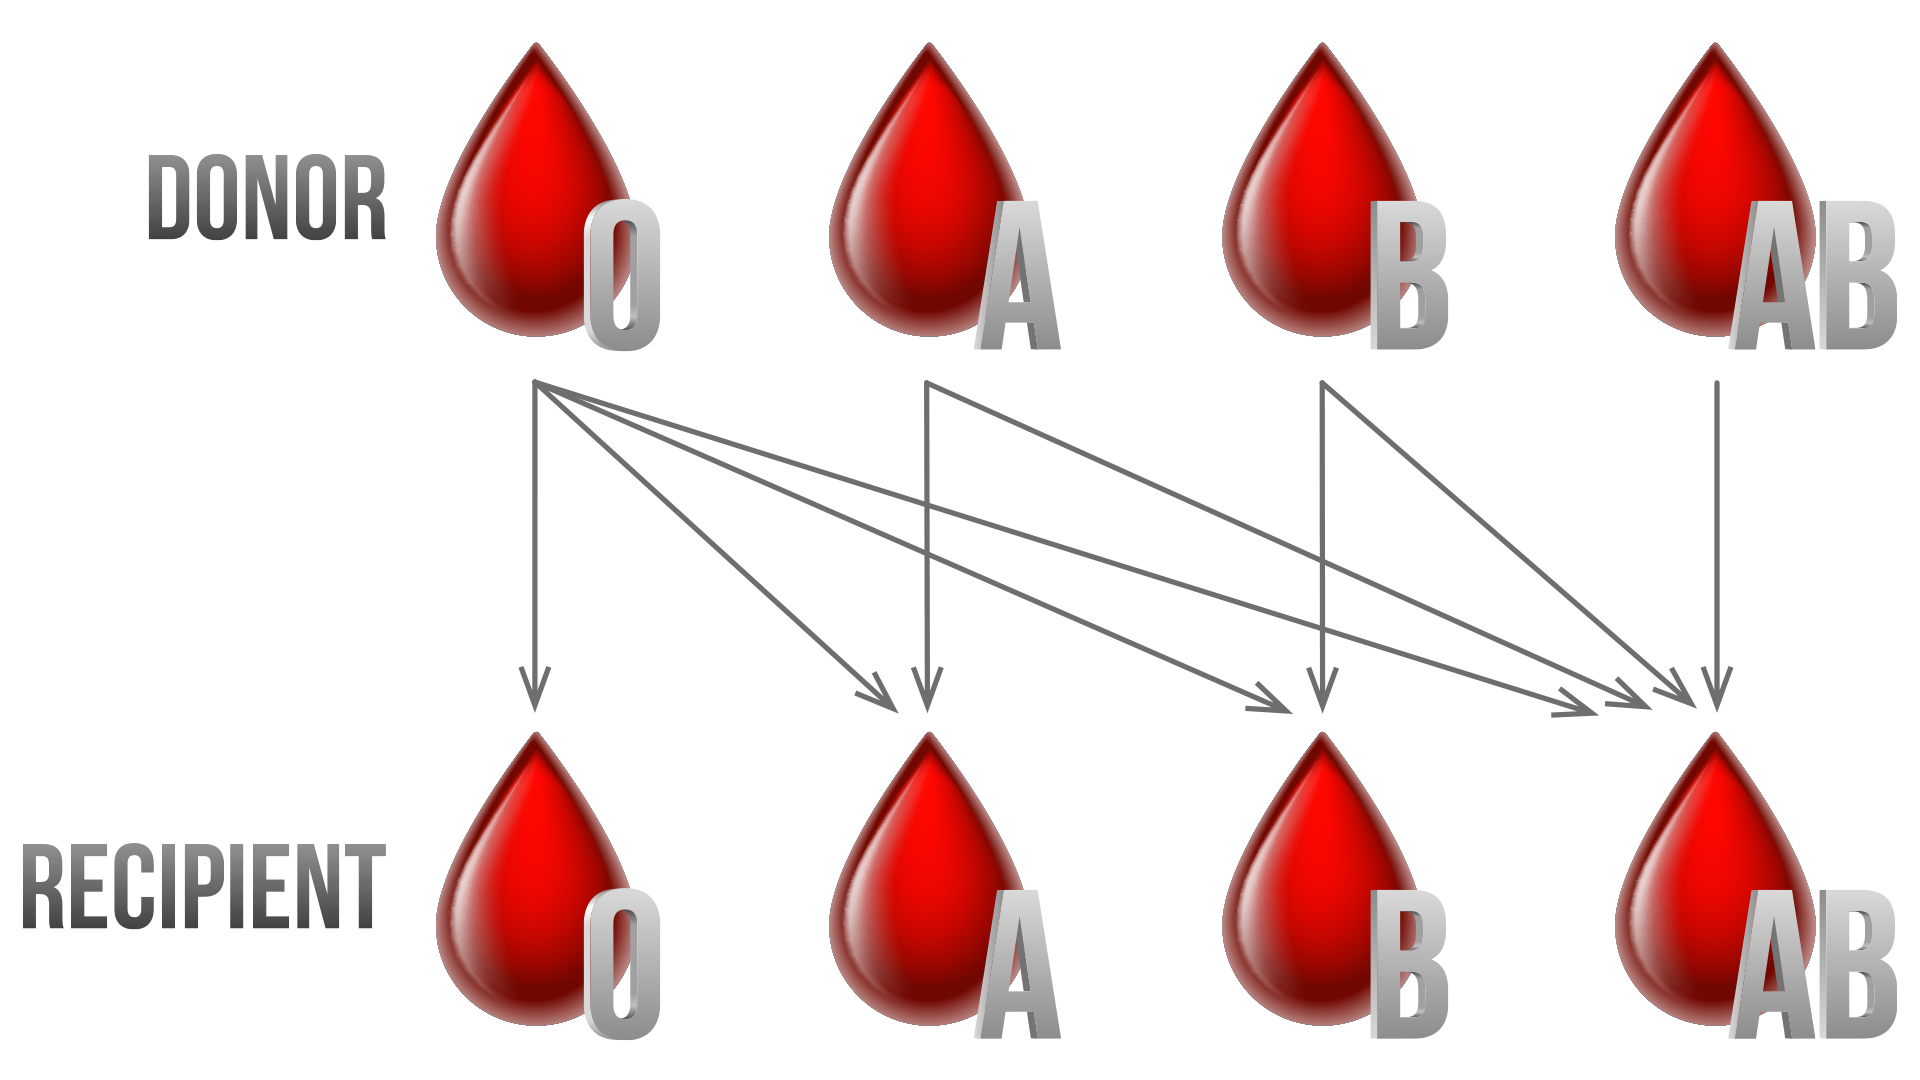 The different blood types